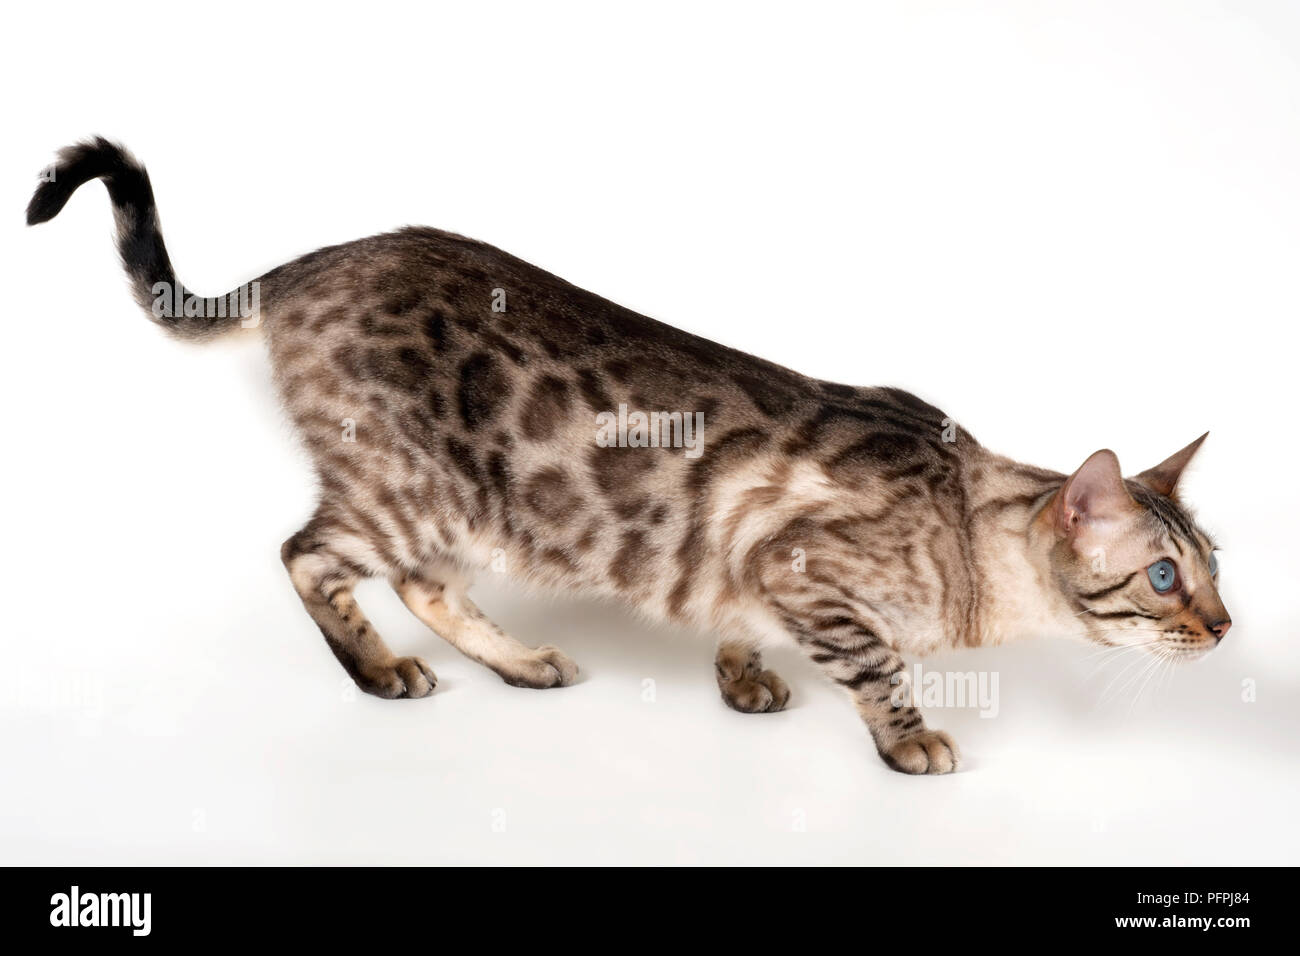 Brown rosetted Bengal cat with blue eyes, crouching, side view Stock Photo